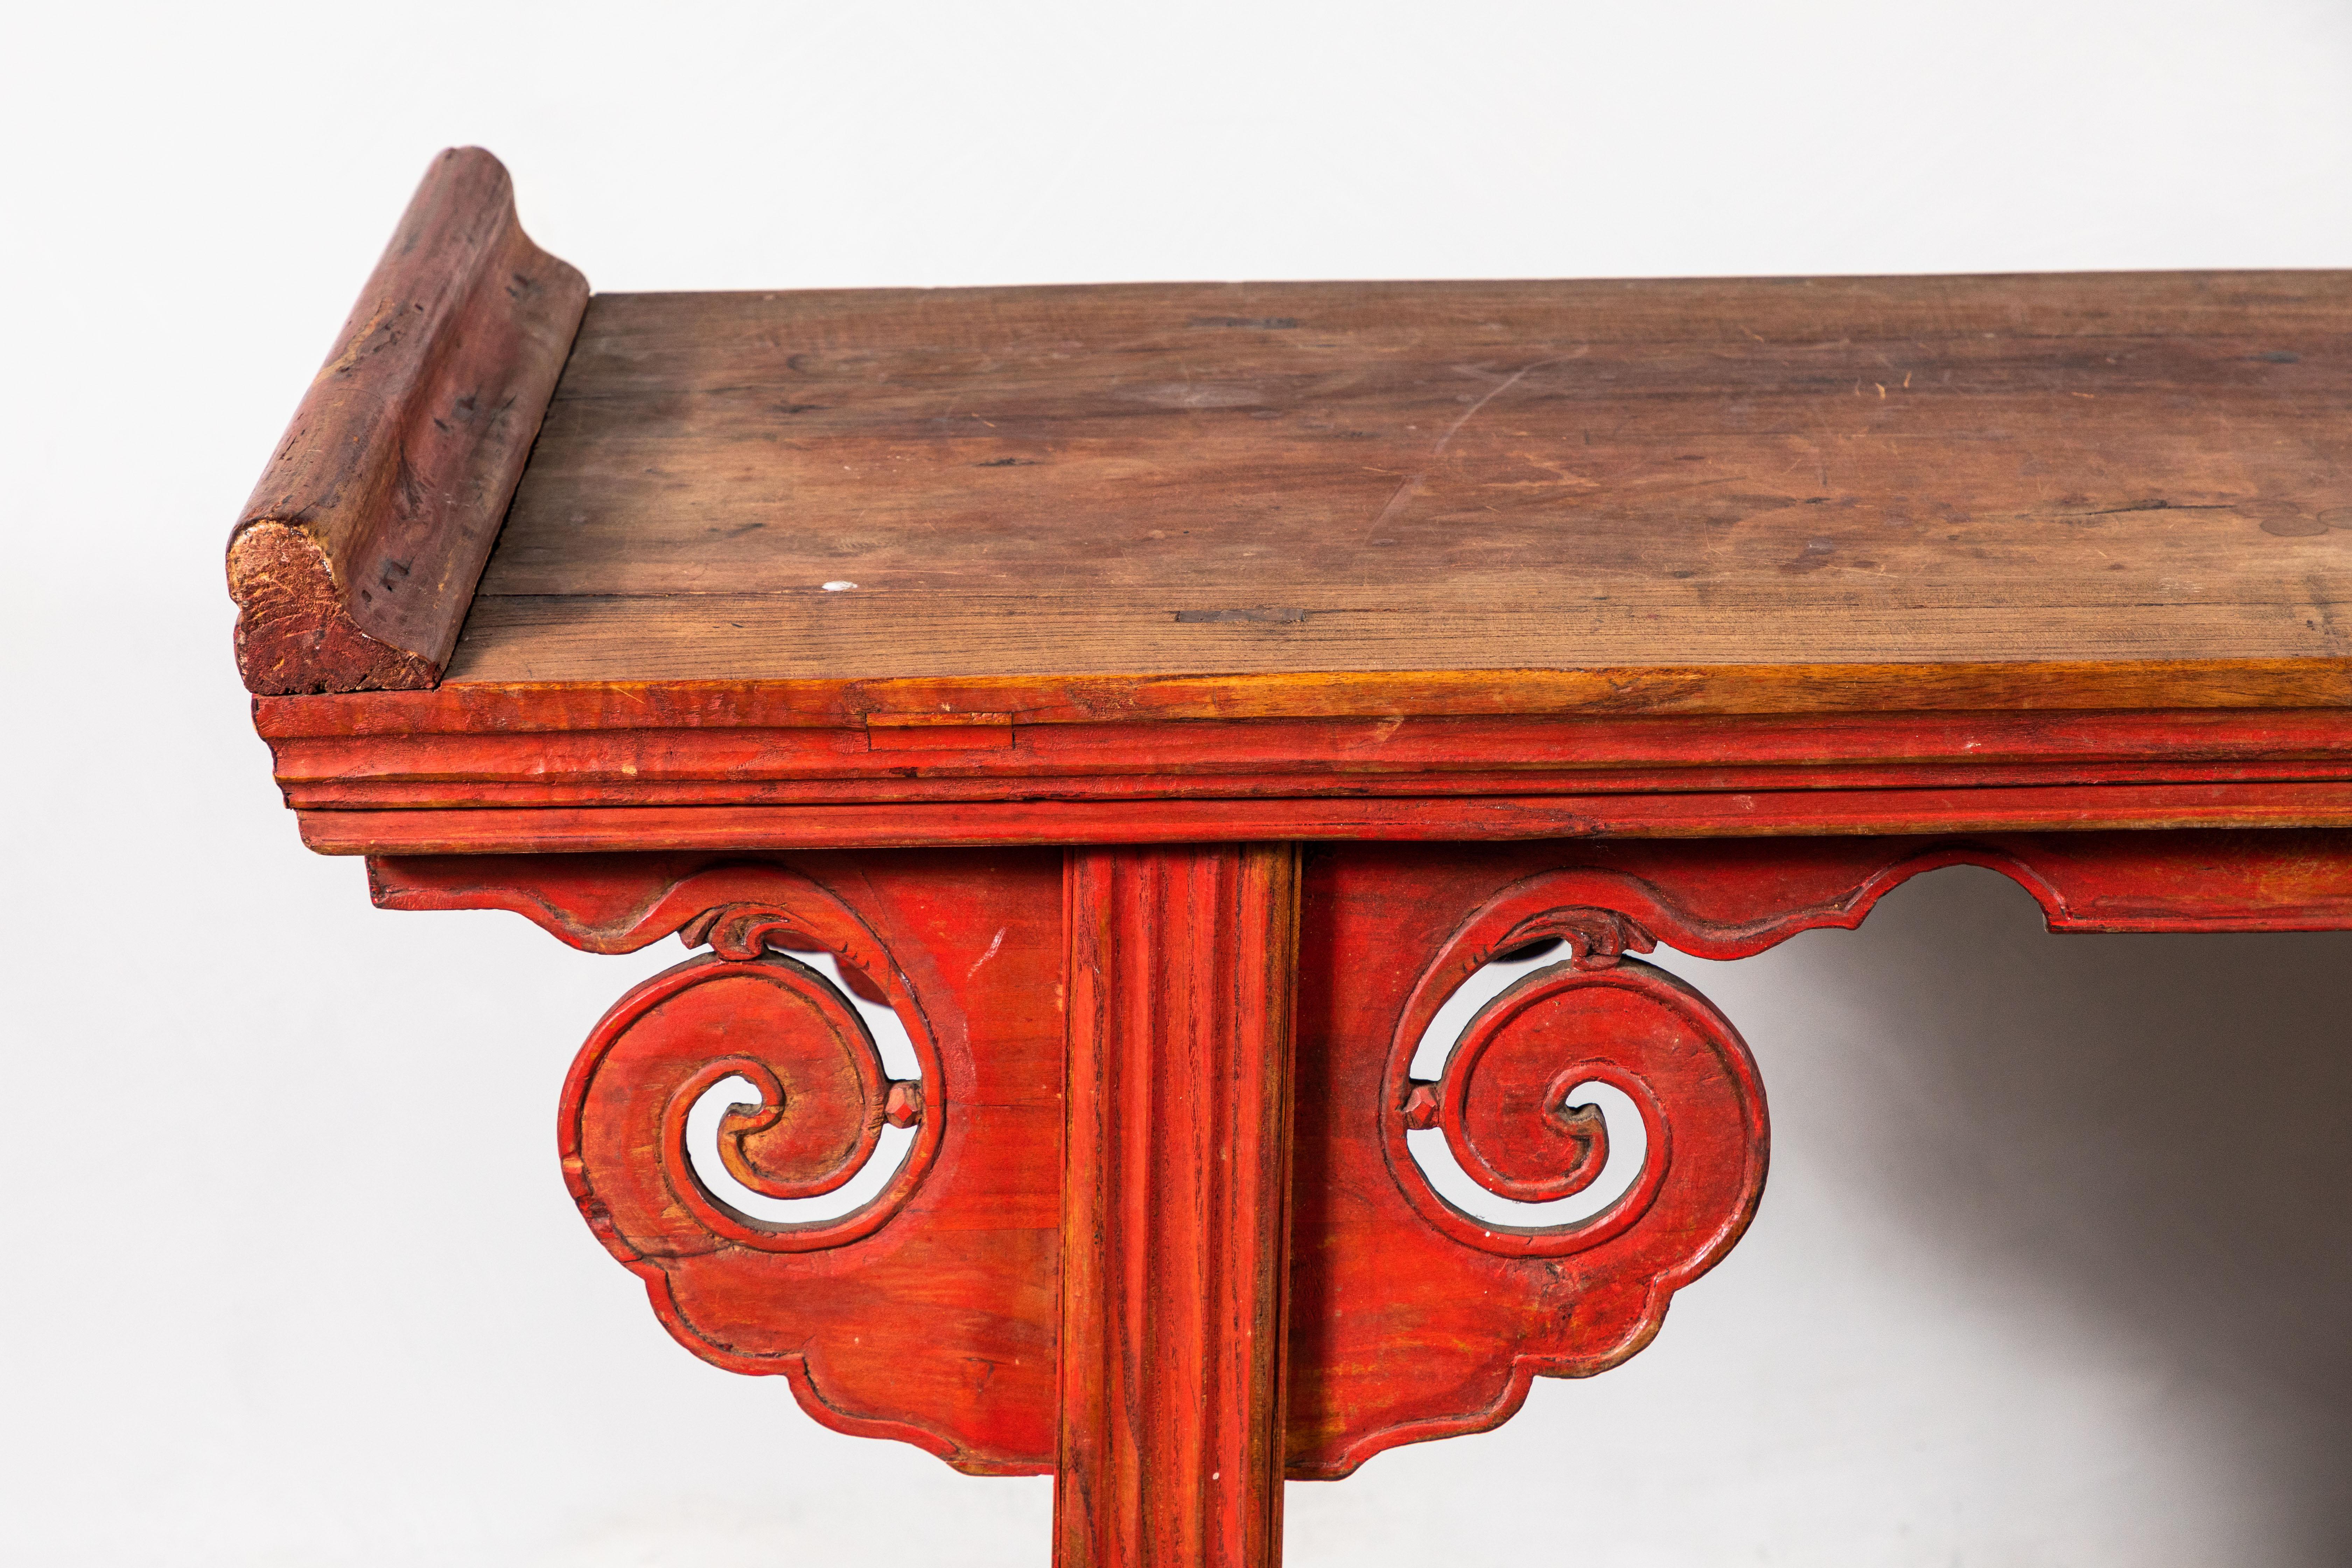 Chinese scroll console with red tones and a natural top, embellished with period details.